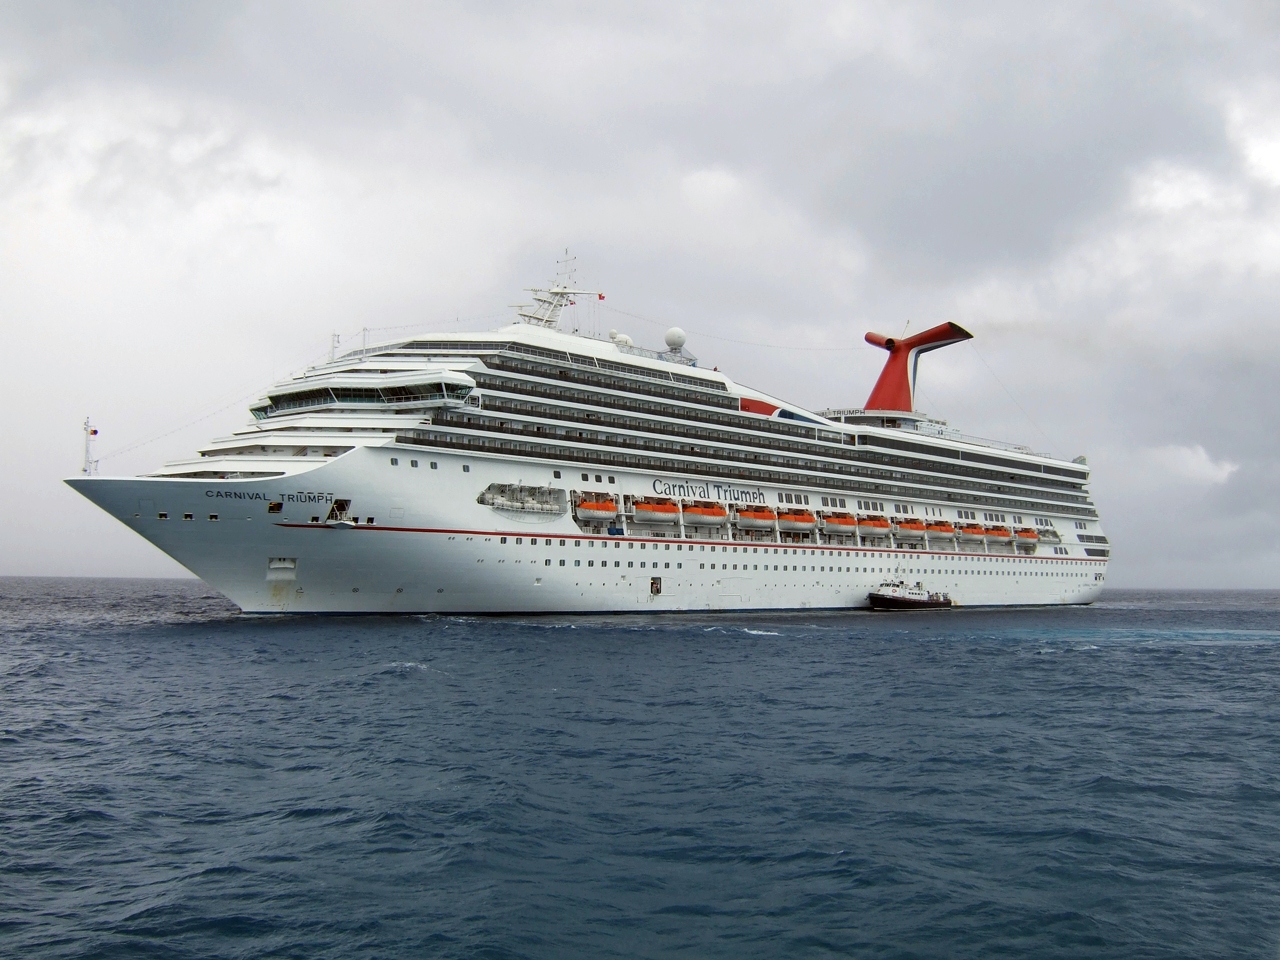 <p>The Carnival Triumph “poop cruise”, as it’s called, occurred in 2013 when a fire broke out in the engine room of the 2,700-passenger cruise ship.</p>